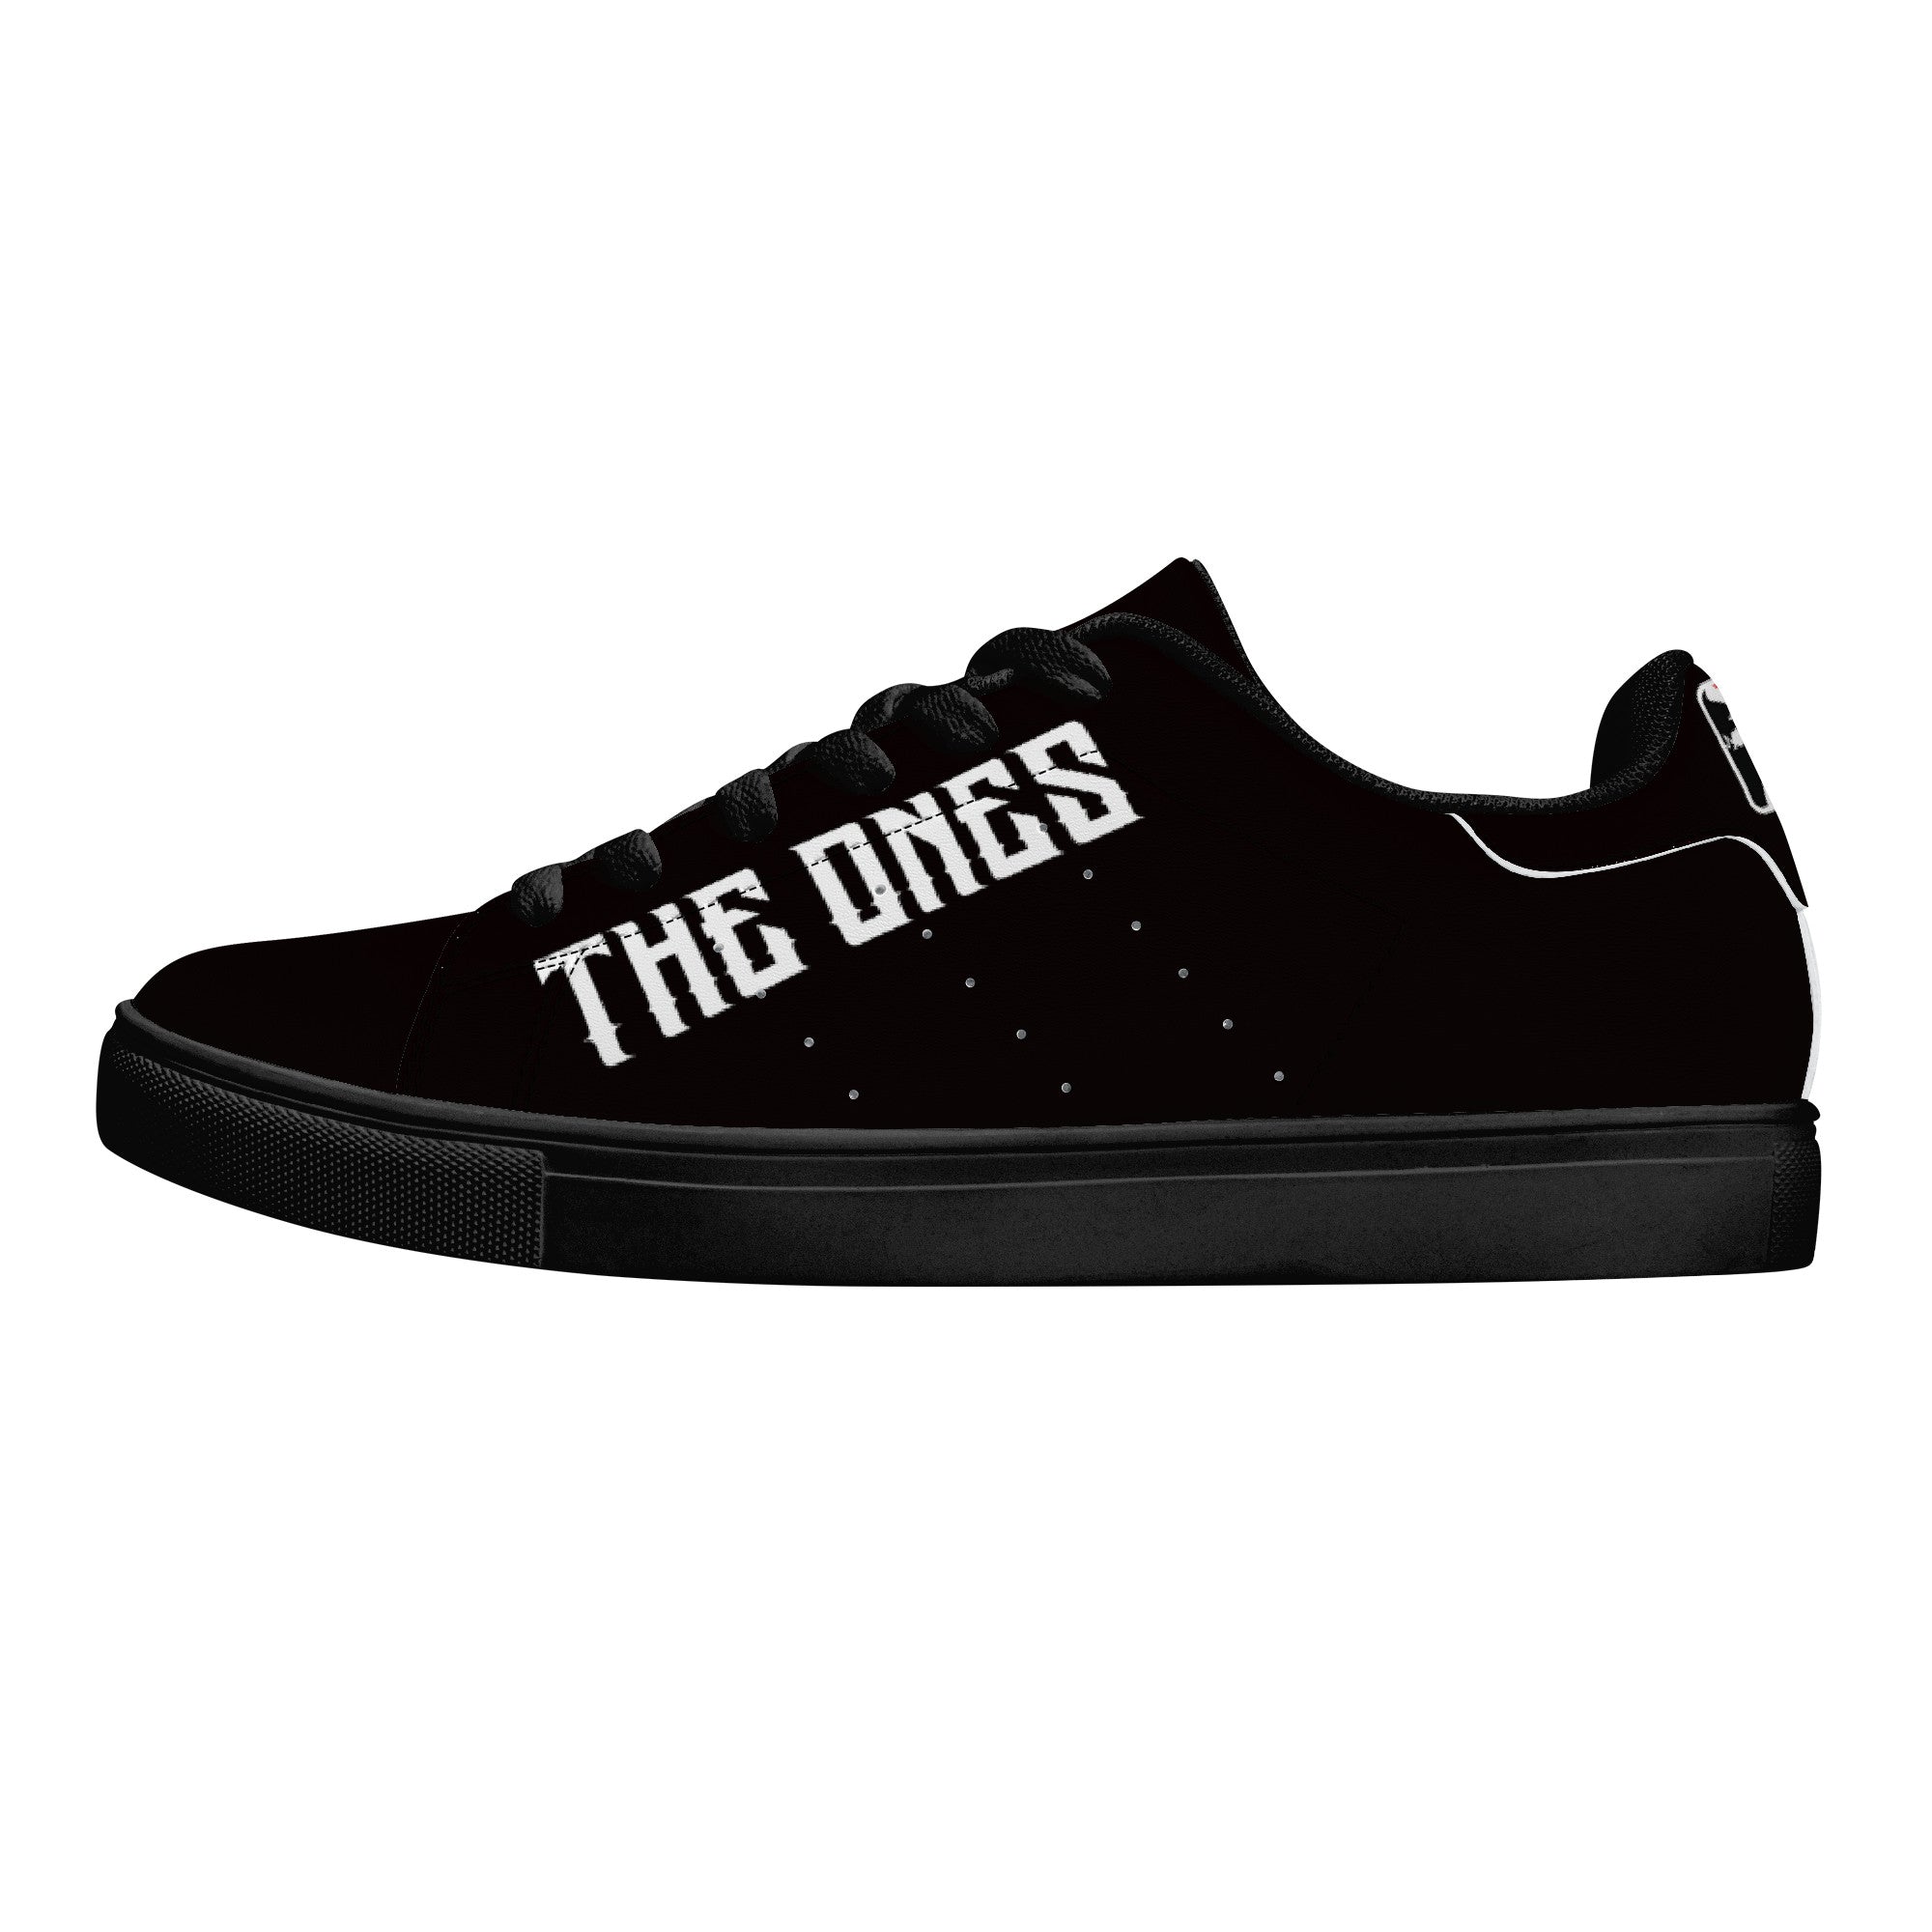 The Ones - White on Black - Low-Top Synthetic Leather Sneakers - Black - Shoe Zero